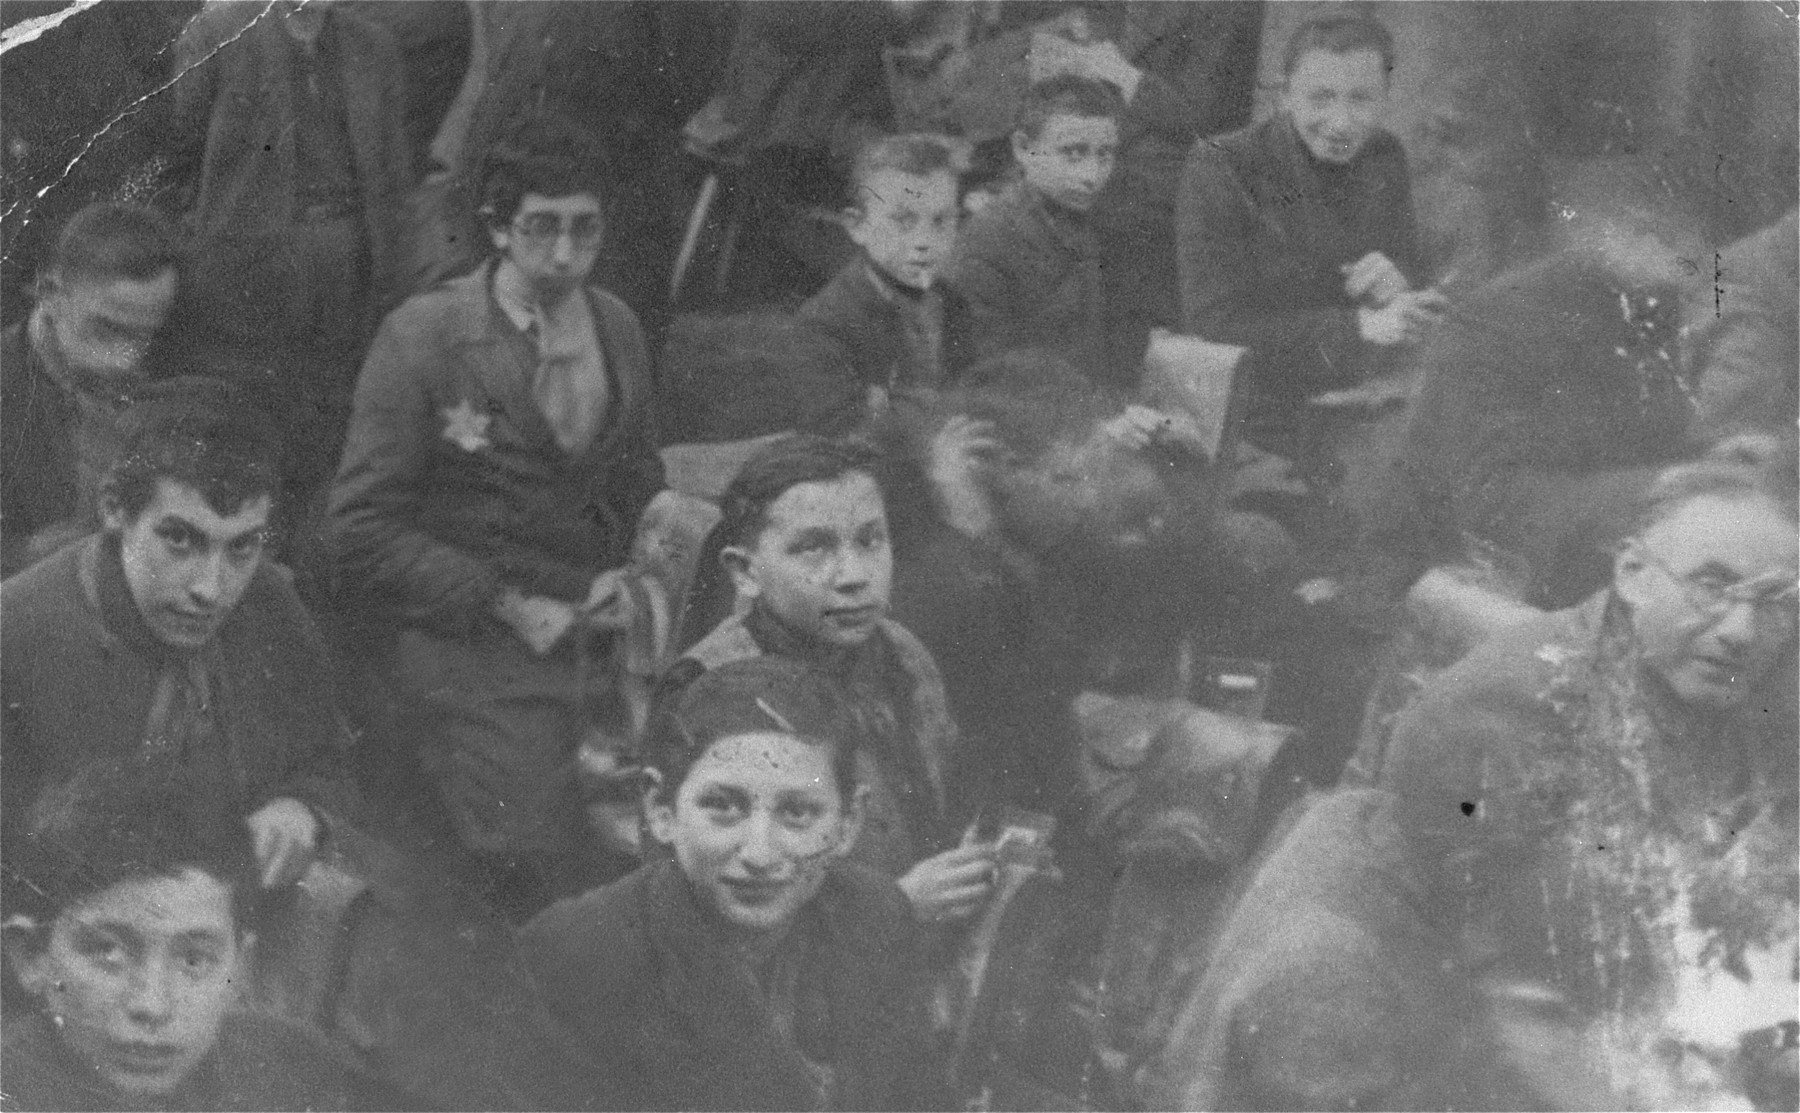 Adults and children work in a harness-making workshop in the Lodz ghetto.

Lajb Majerowicz is pictured in the upper right corner.